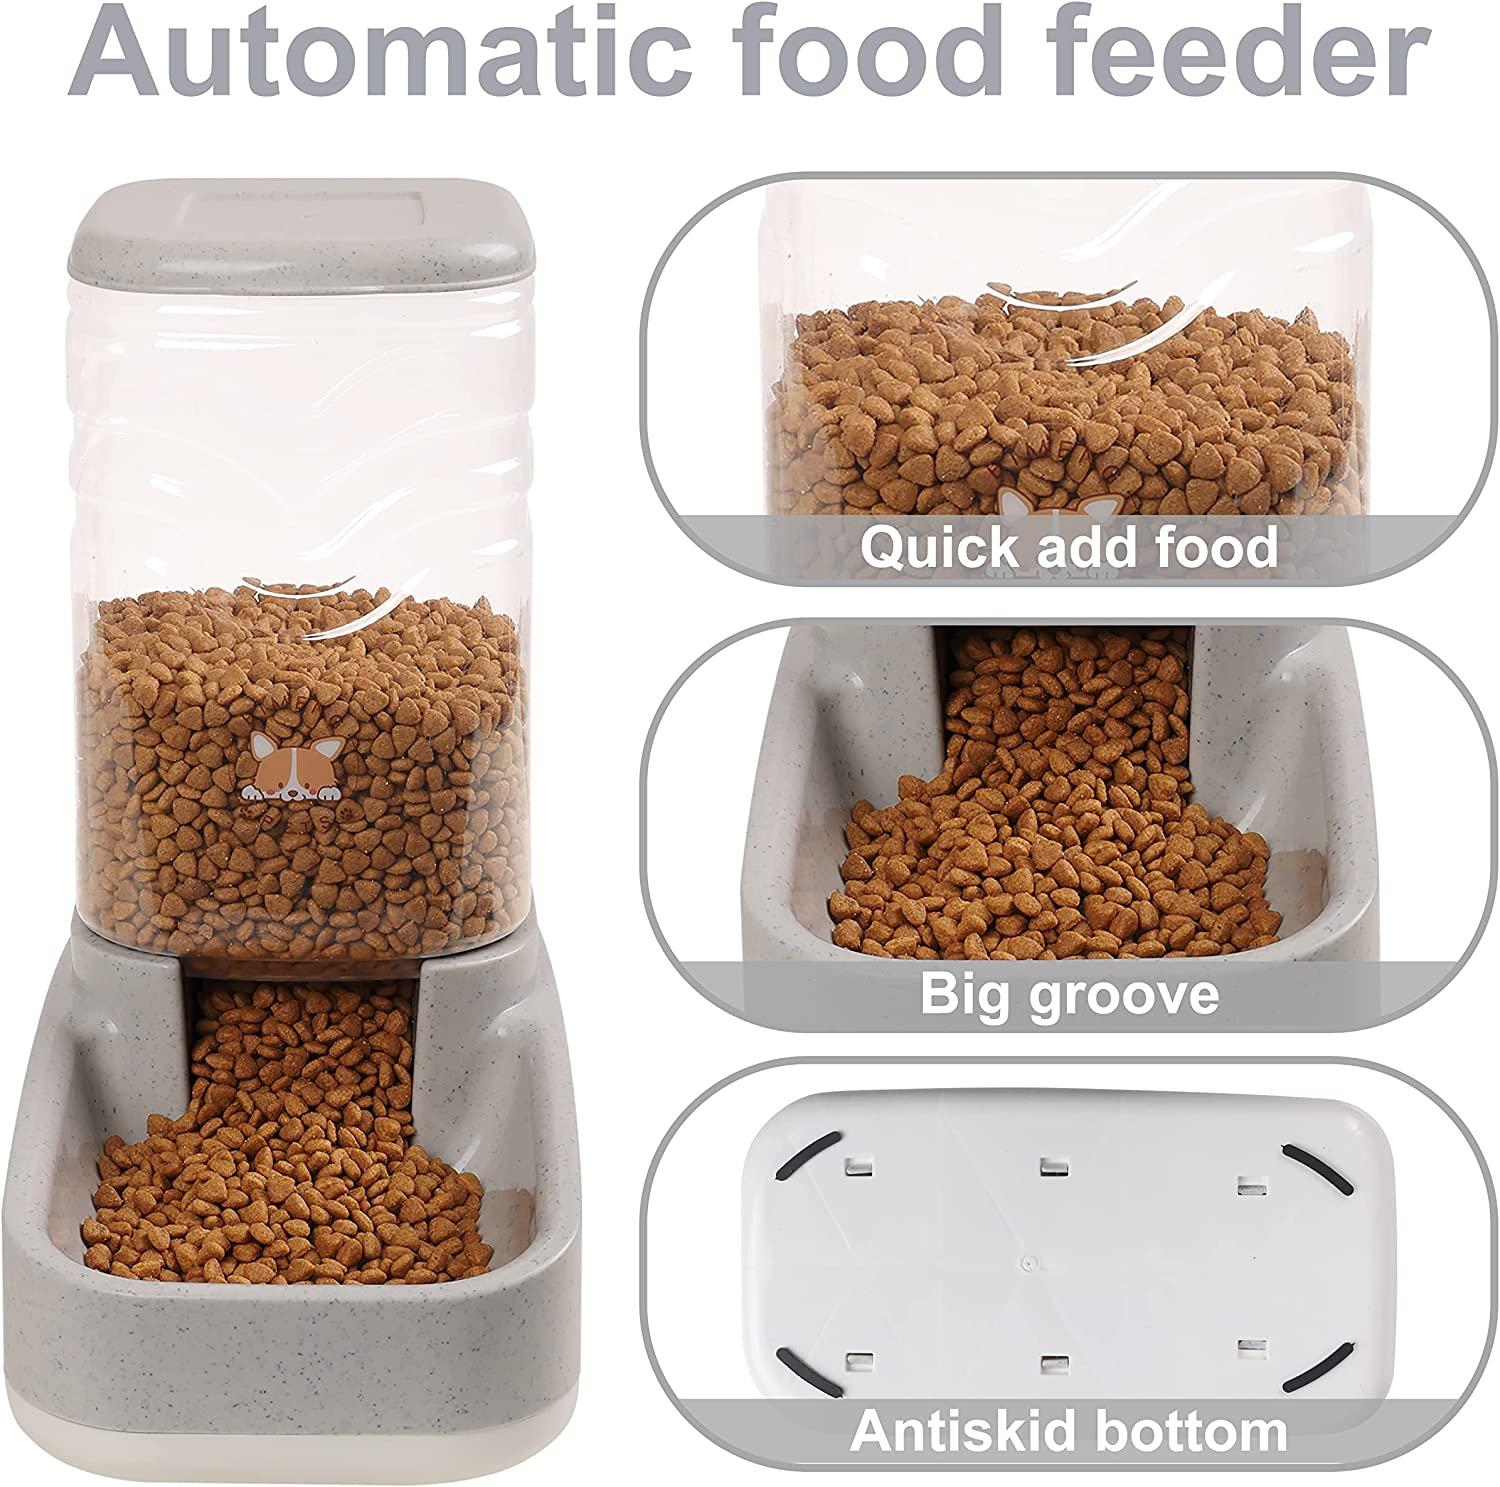 Pets Automatic Feeder set Pets gravity food feeder and water